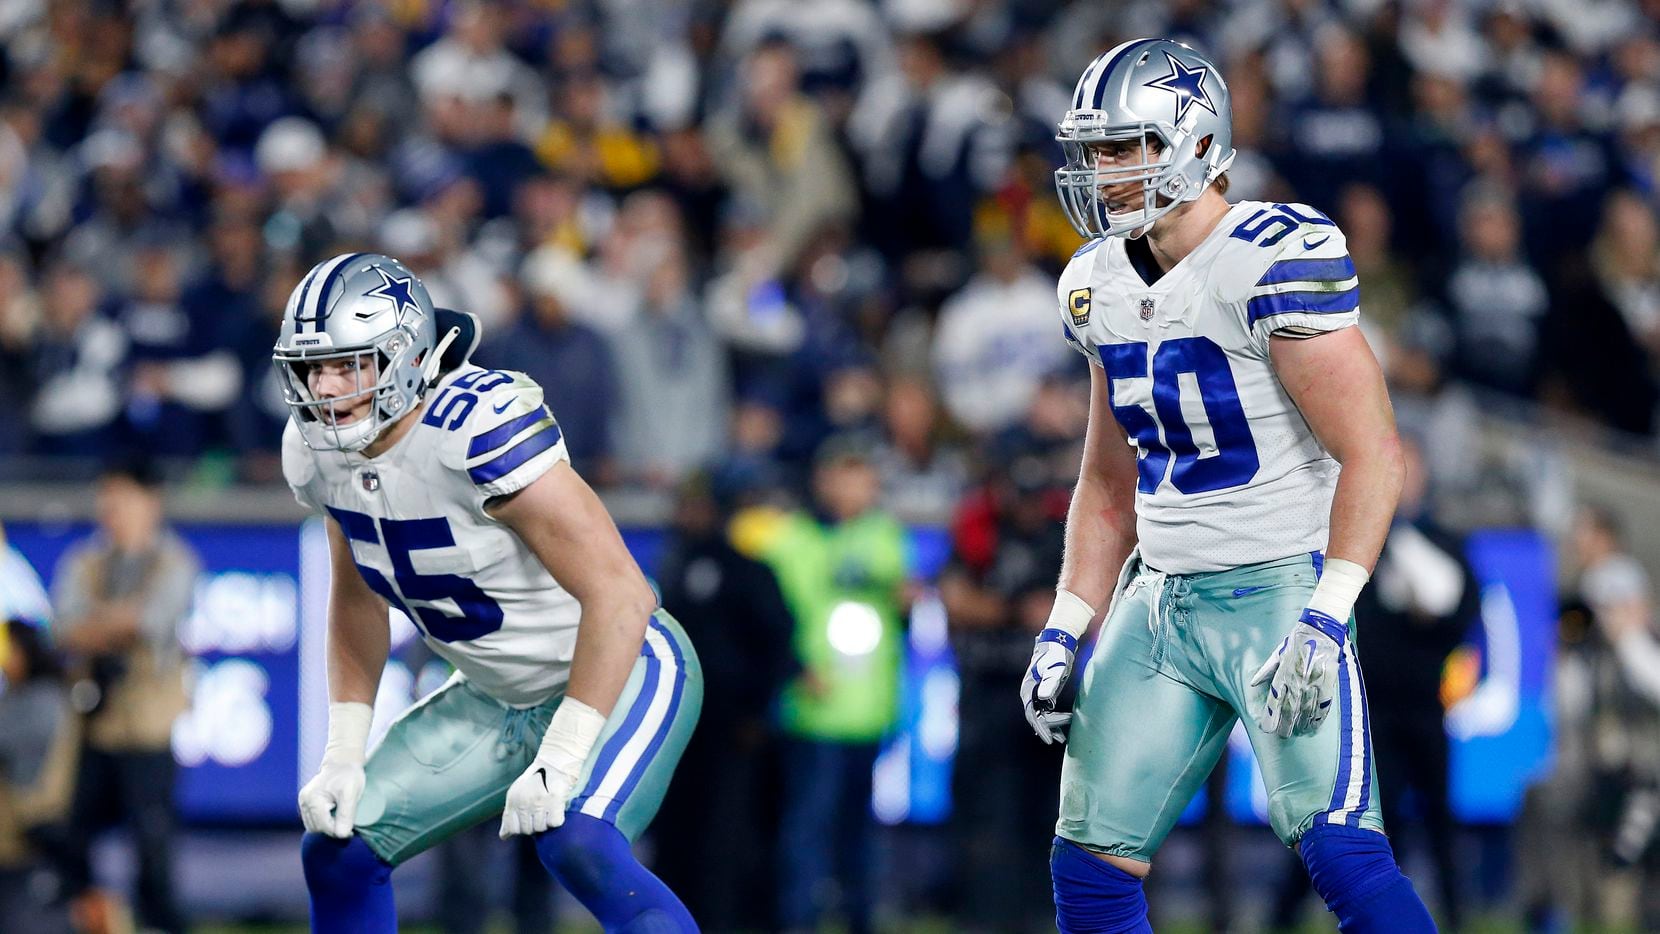 Stephen Jones says Cowboys 'feel good' about Sean Lee playing vs. Rams,  Leighton Vander Esch officially ruled out